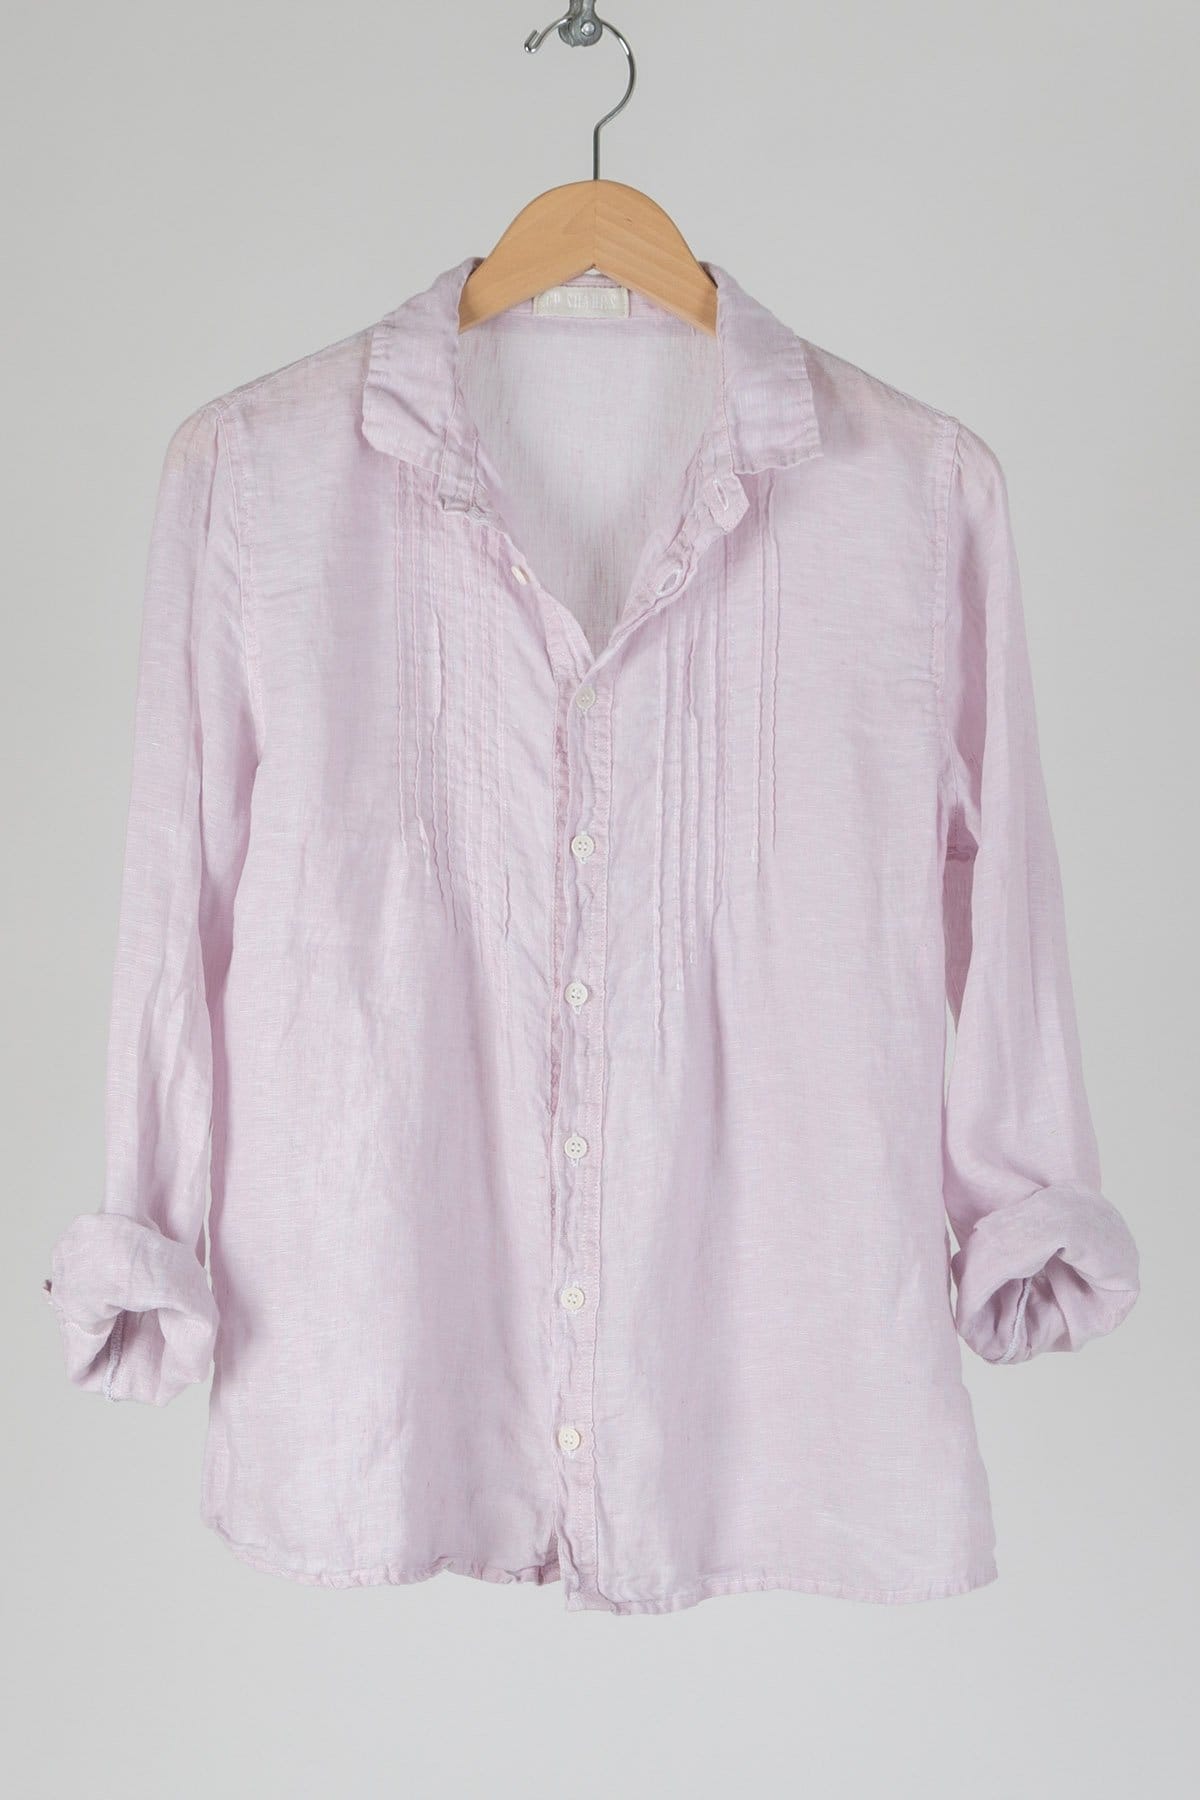 Button down linen shirt with pleasds in a lavender color